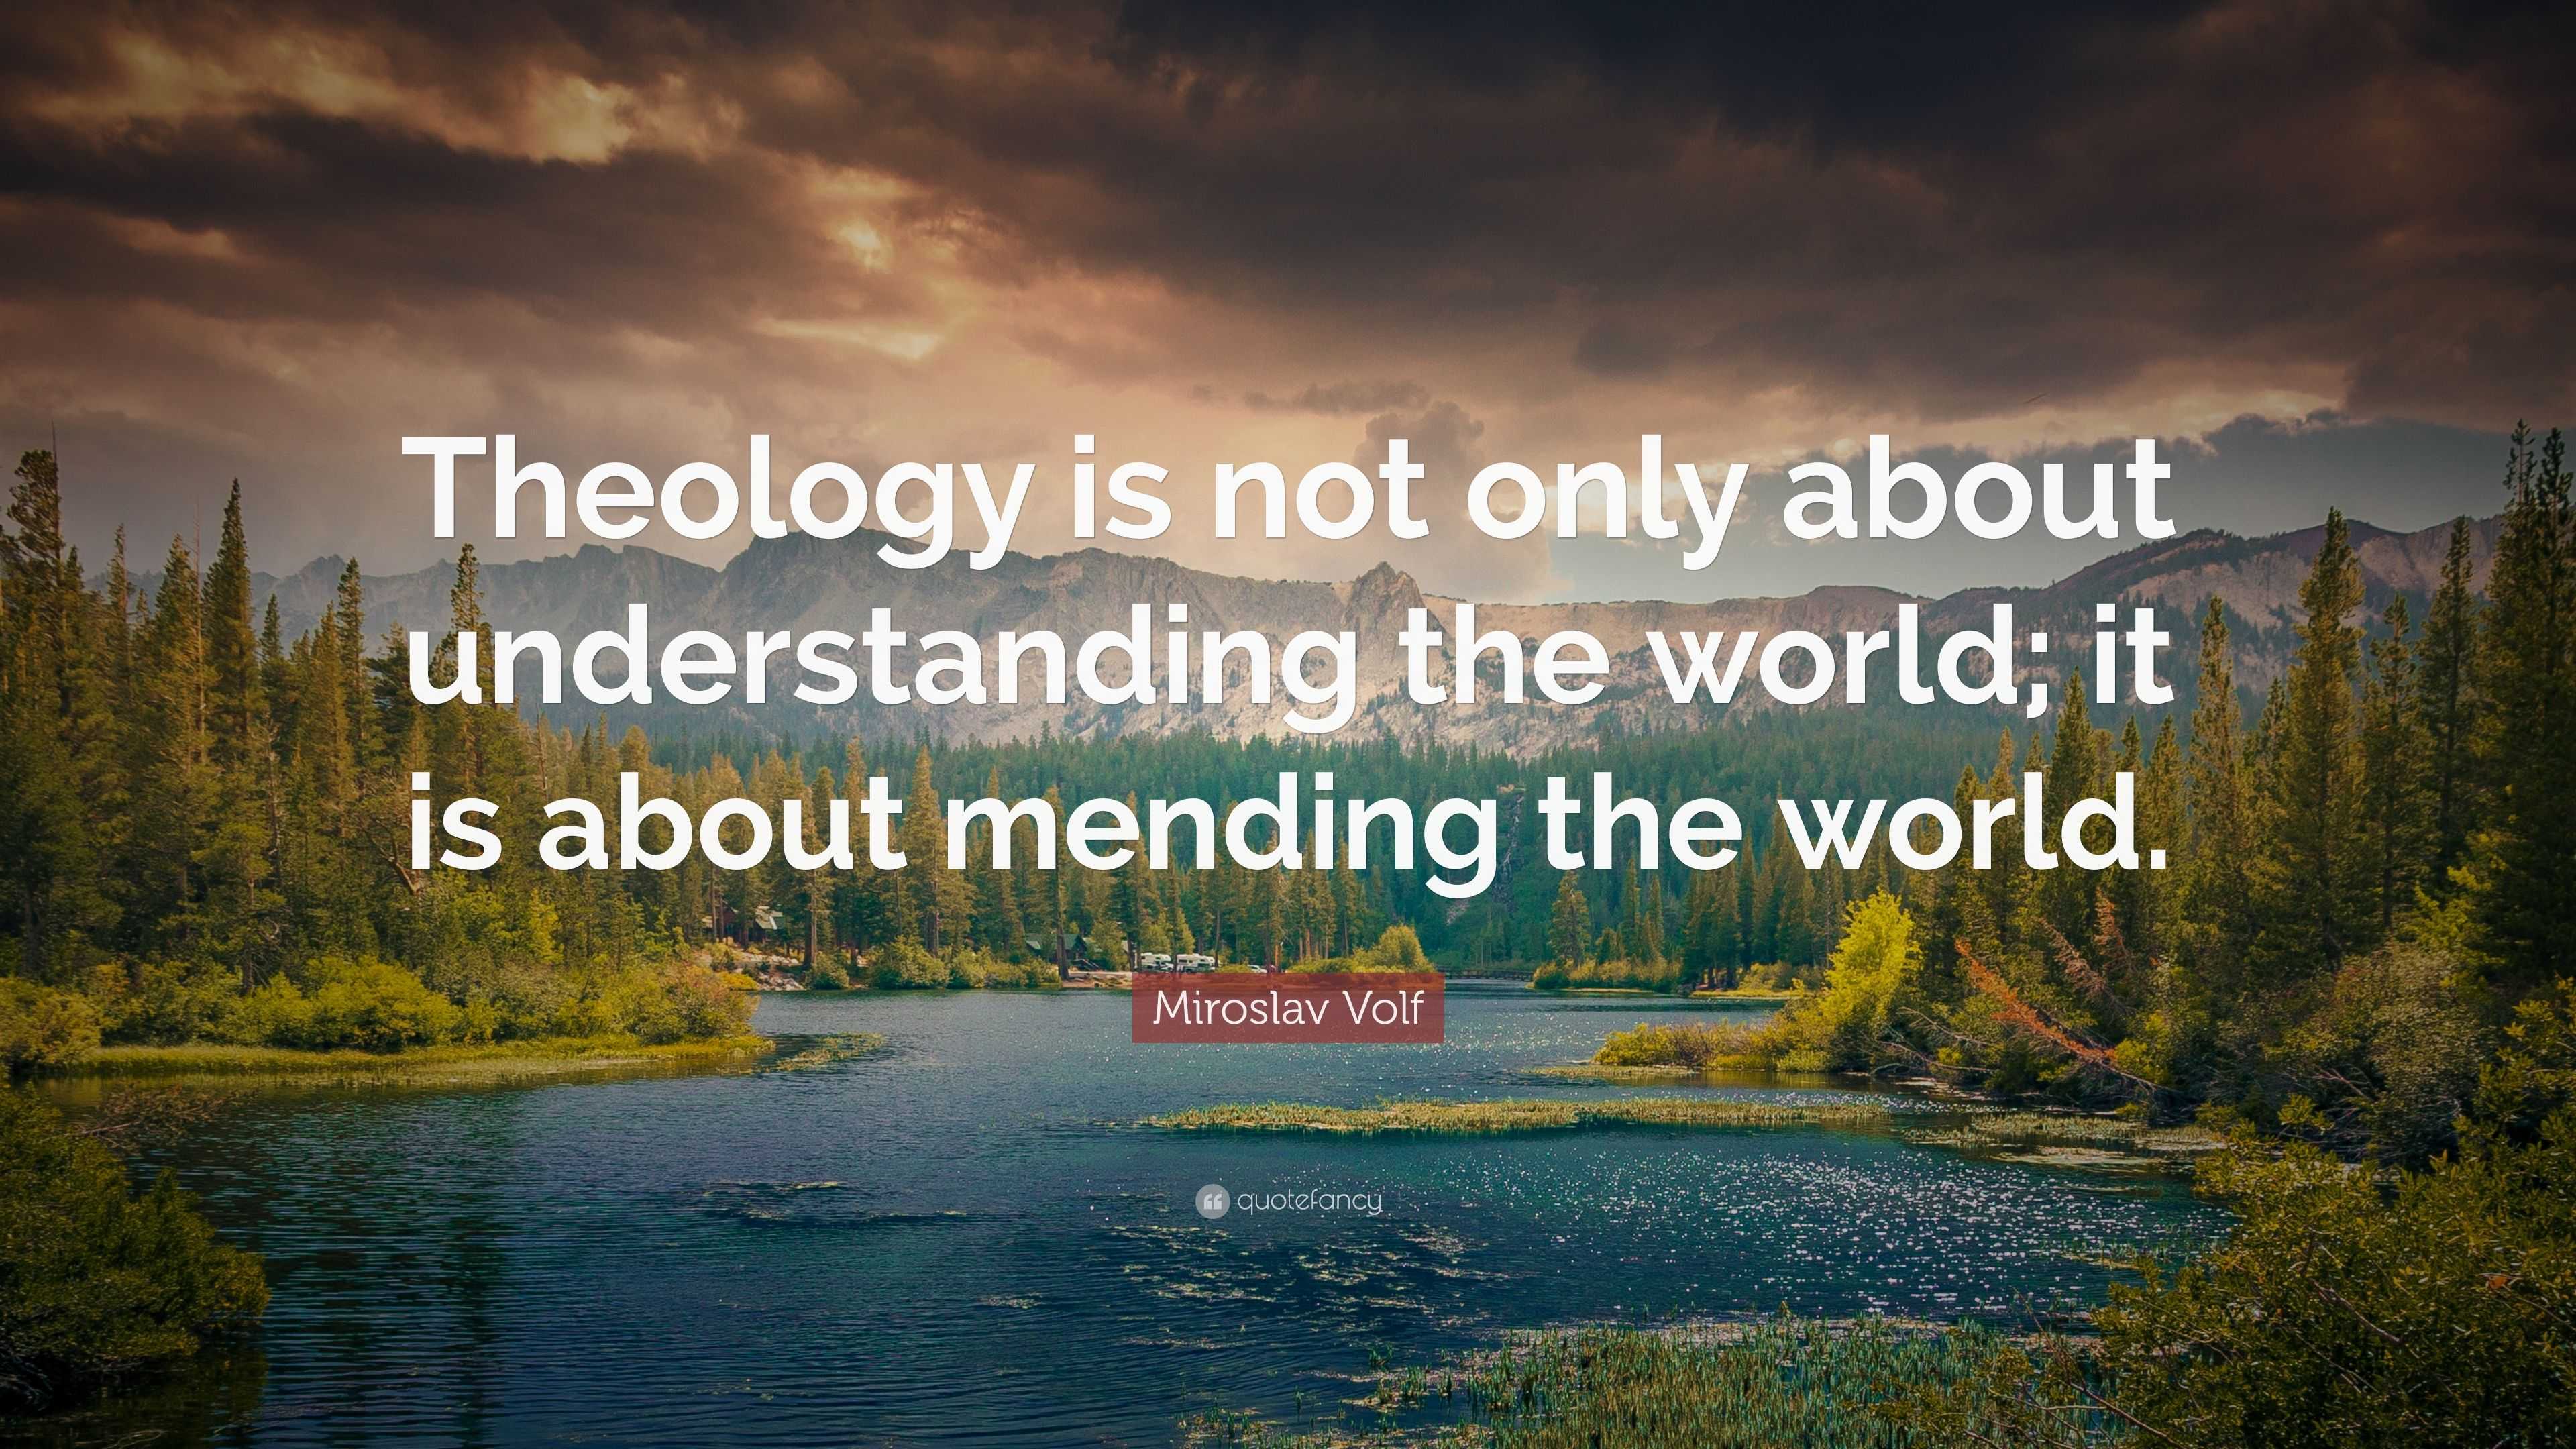 Miroslav Volf Quote: "Theology is not only about understanding the world; it is about mending ...